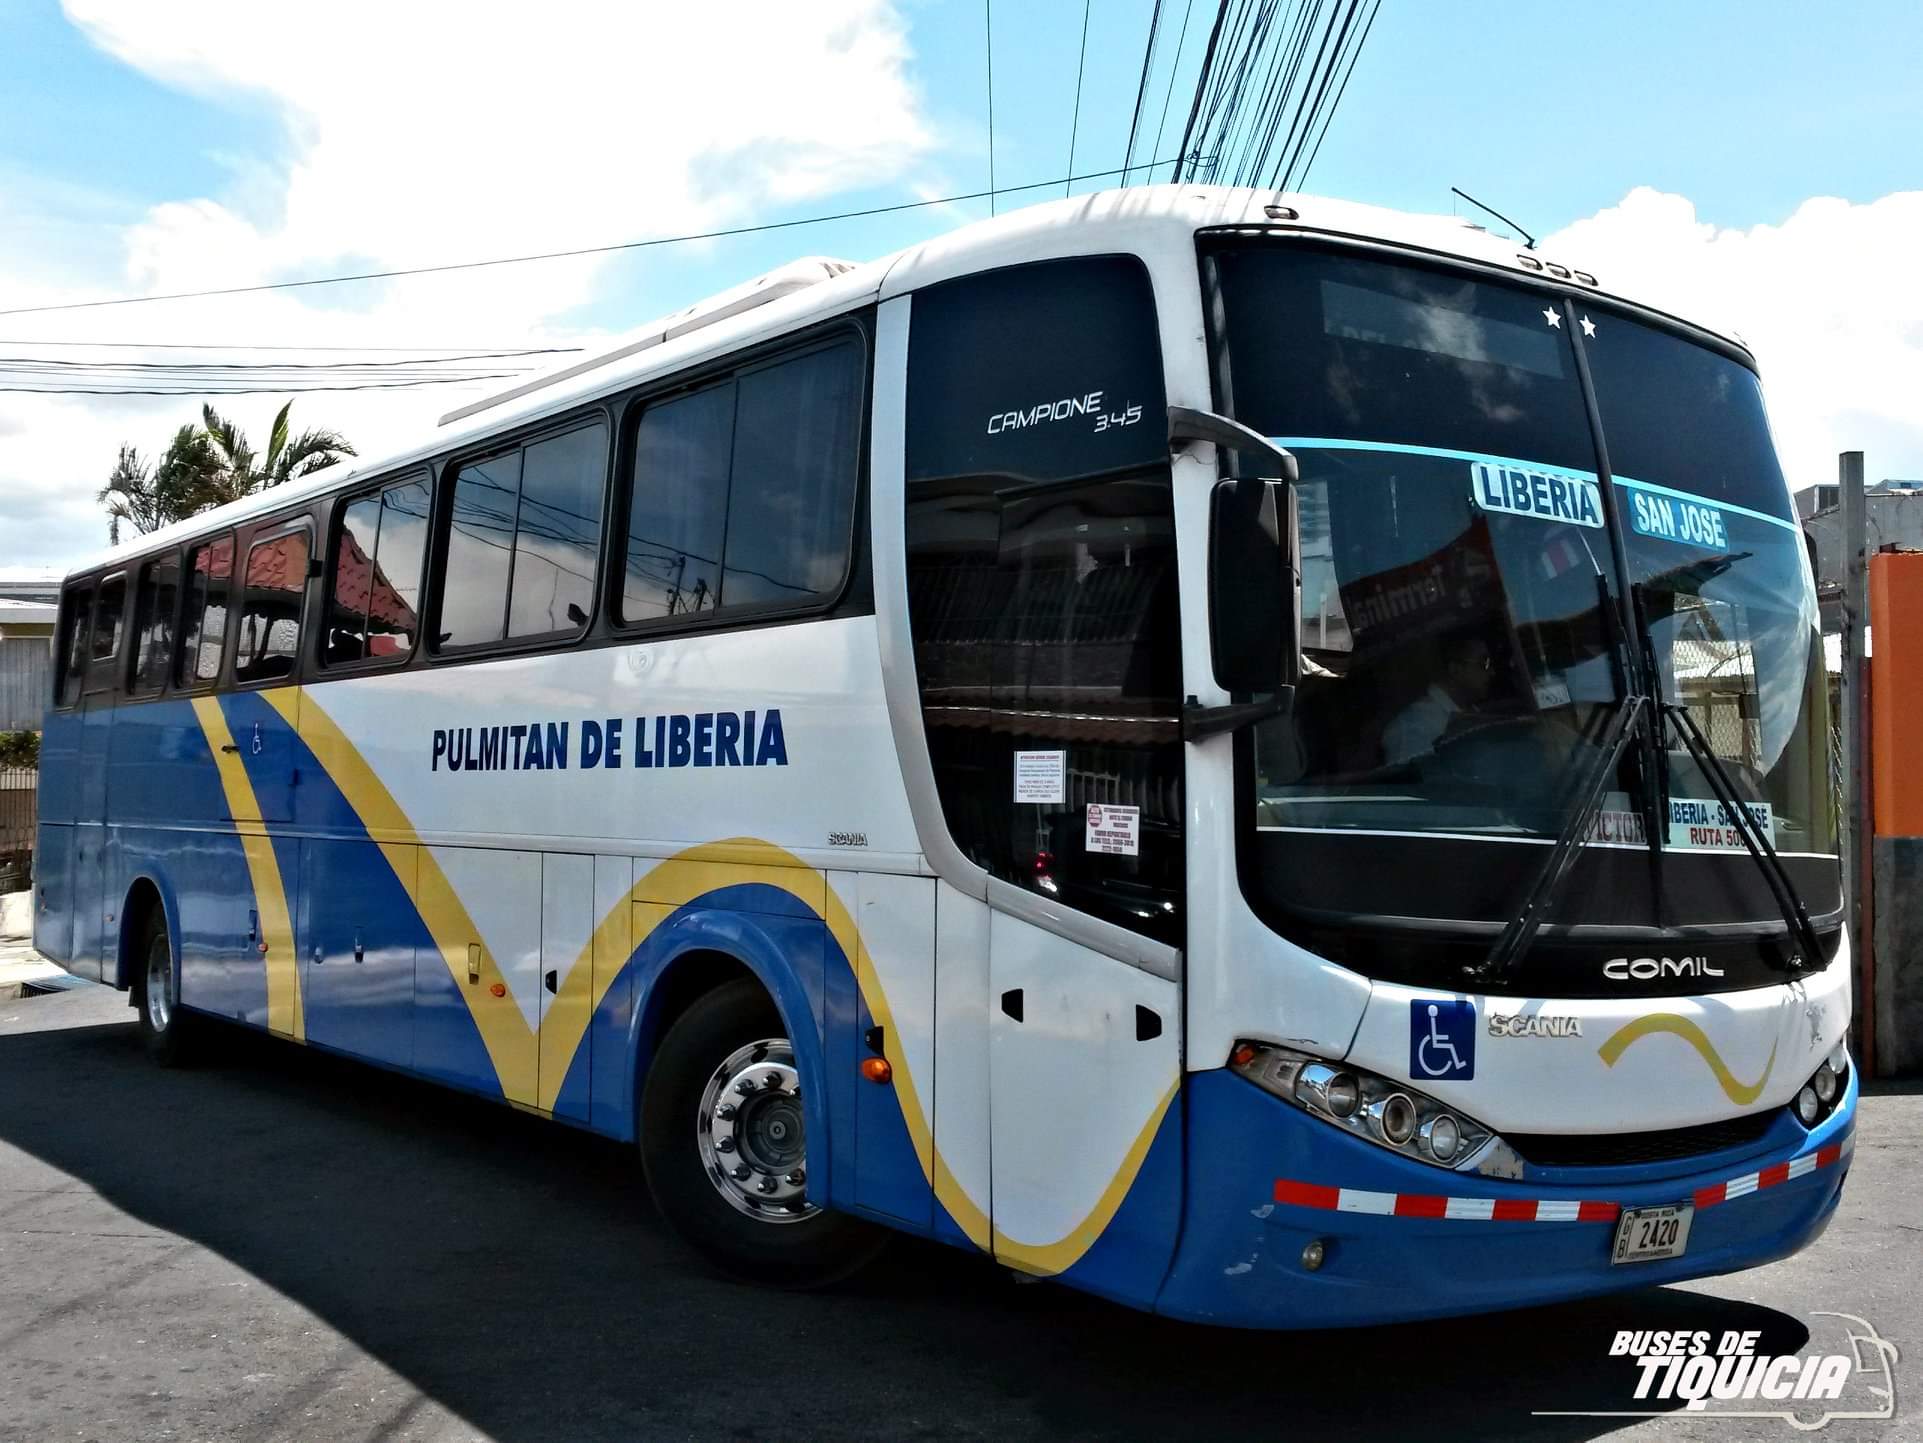 
How To Get From Liberia Airport to Playa Del Coco - All Possible Ways, cheapest way from Liberia Airport to Playa Del Coco, Liberia Airport to Playa Del Coco, Liberia Costa Rica Airport to Playa Del Coco, Liberia to Playa Del Coco, Liberia costa rica to Playa Del Coco, Liberia to Playa Del Coco bus, Liberia to Playa Del Coco guanacaste, Pulmitan De Liberia